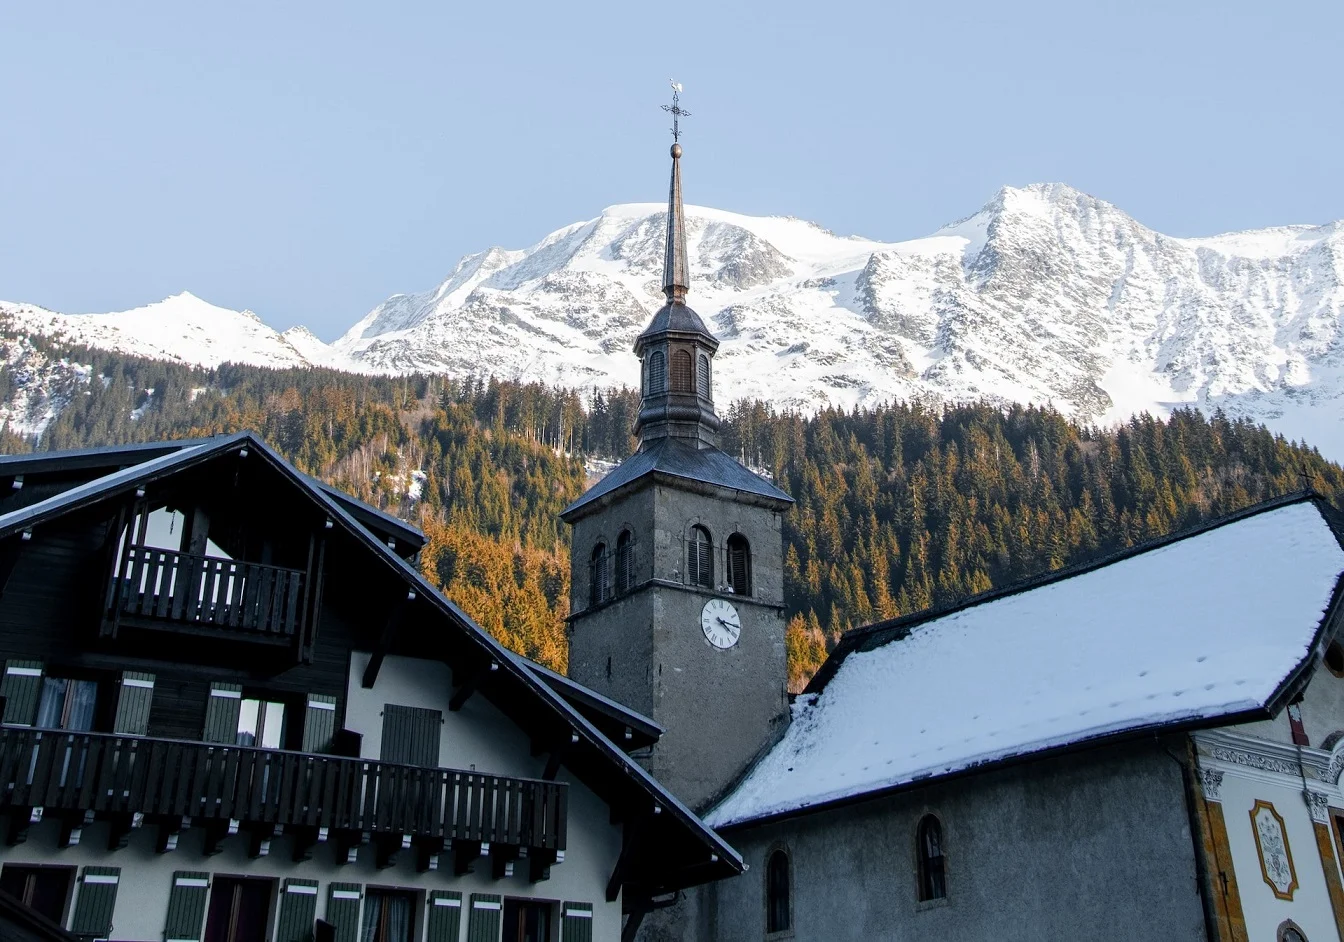 a building with a steeple in front of a snowy mountain